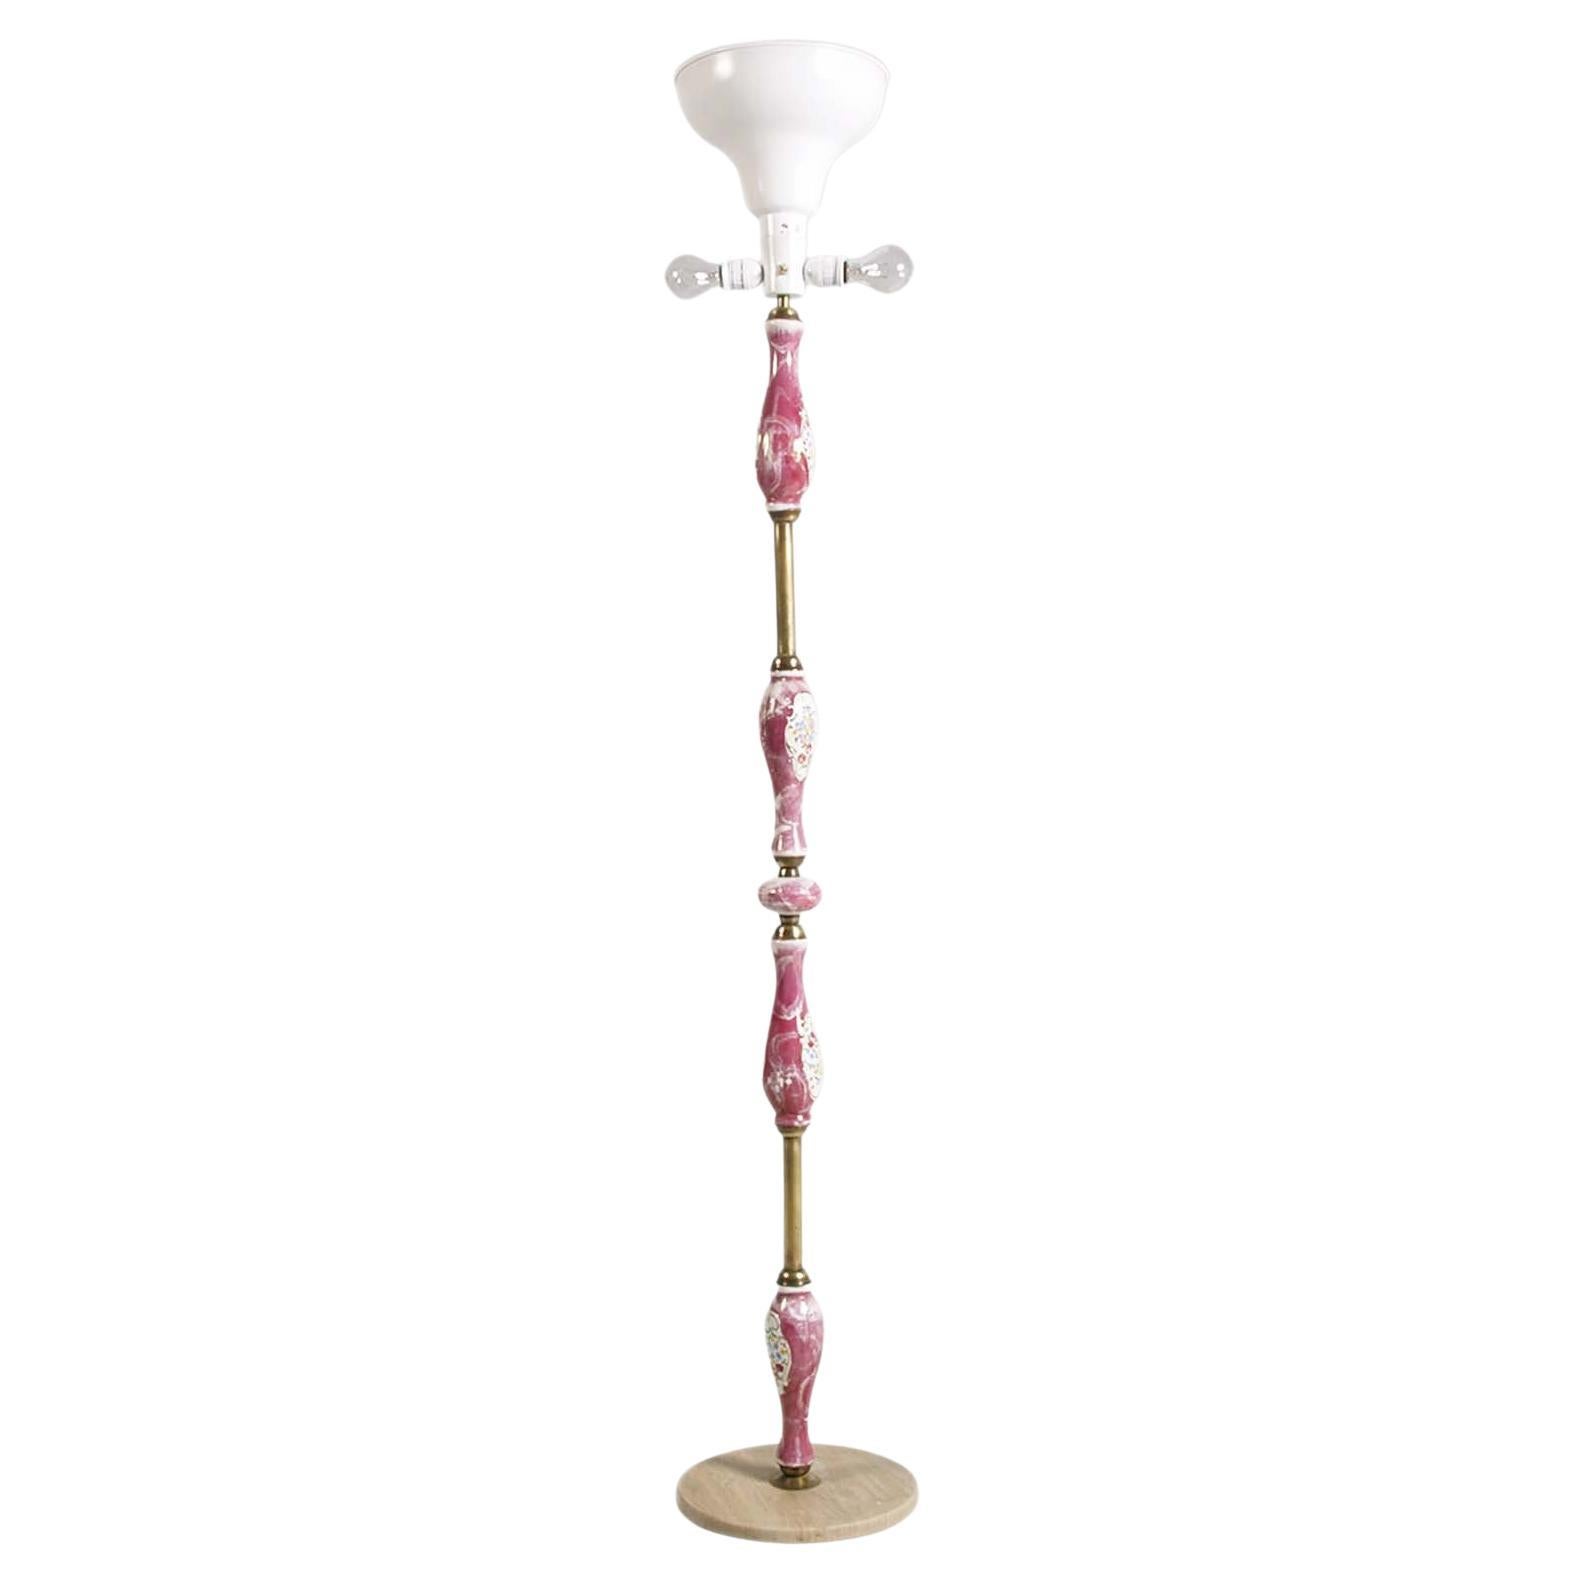 Art Deco Floor Lamp with Gilt Brass Stem with Inserts Richard Ginori Porcelain For Sale